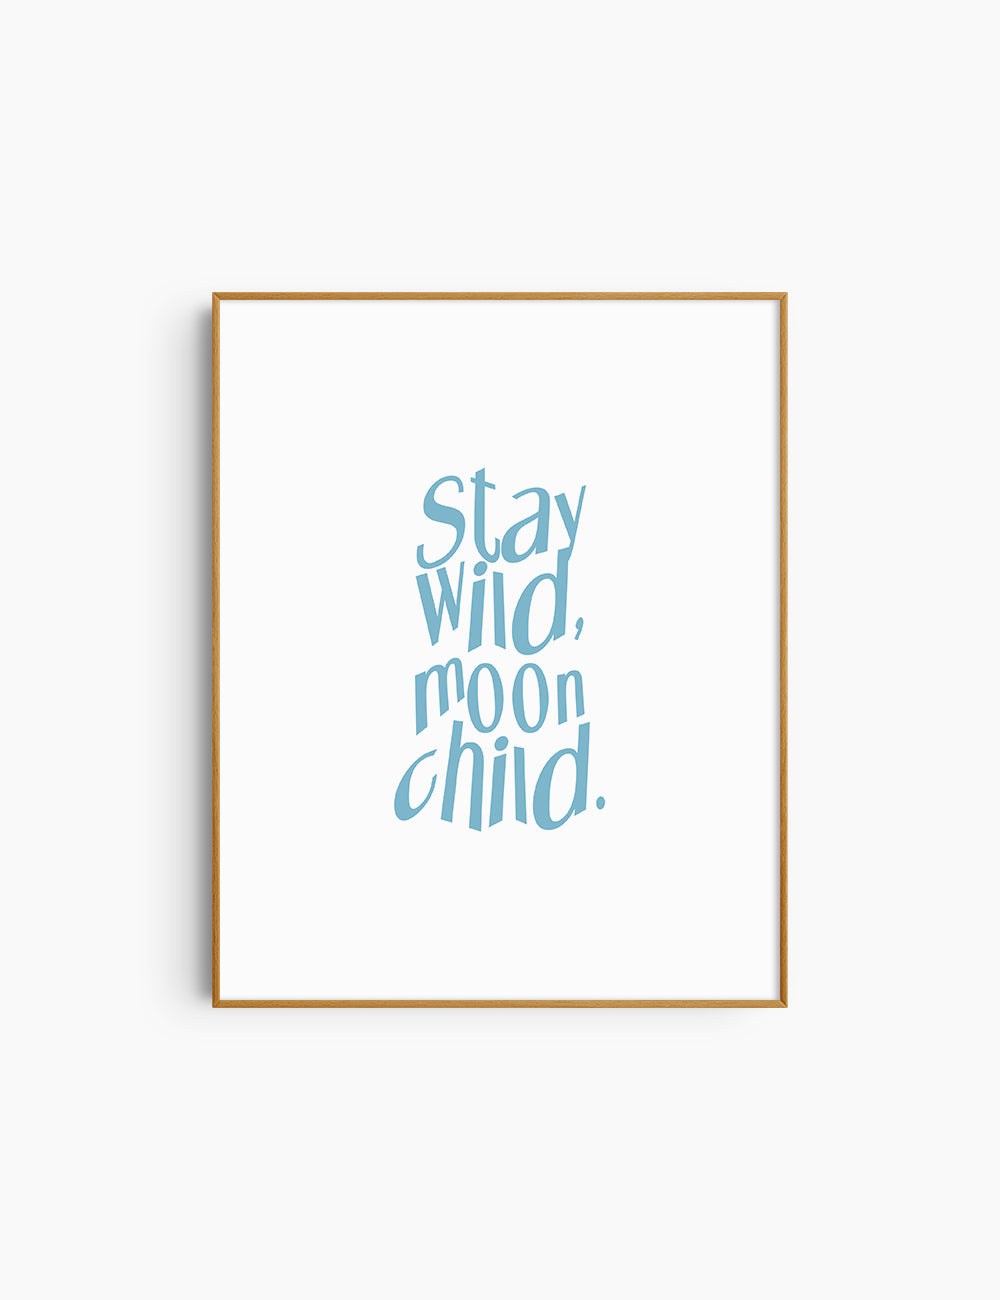 STAY WILD, MOON CHILD. Light Blue and White. Printable Wall Art Quote.